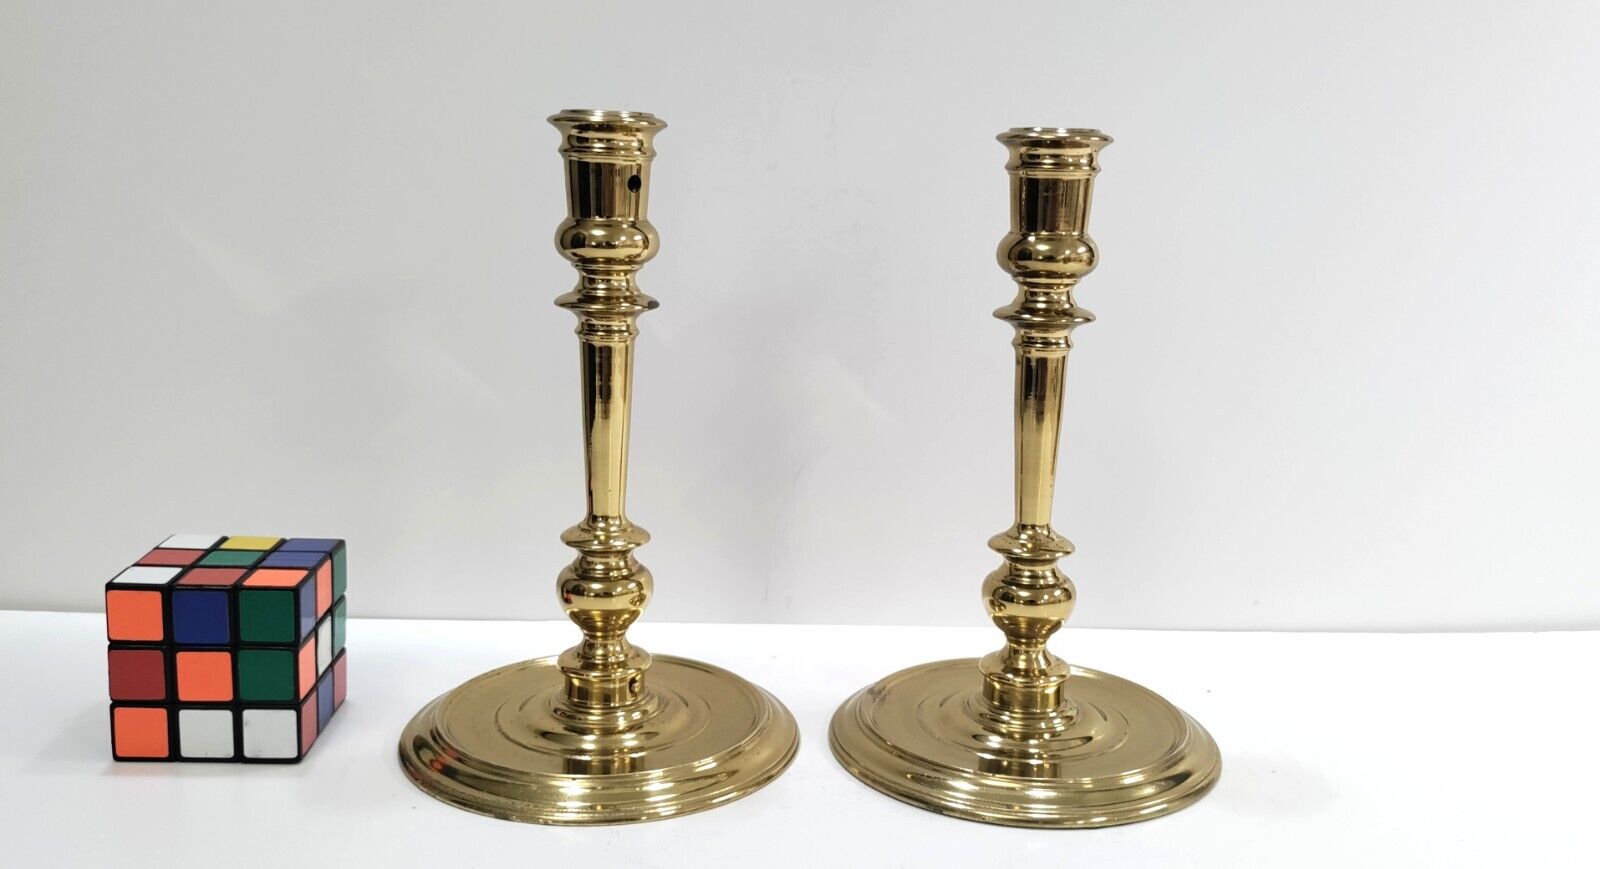 Virginia Metalcrafters Colonial Williamsburg Brass Candlesticks 8” CW16-2